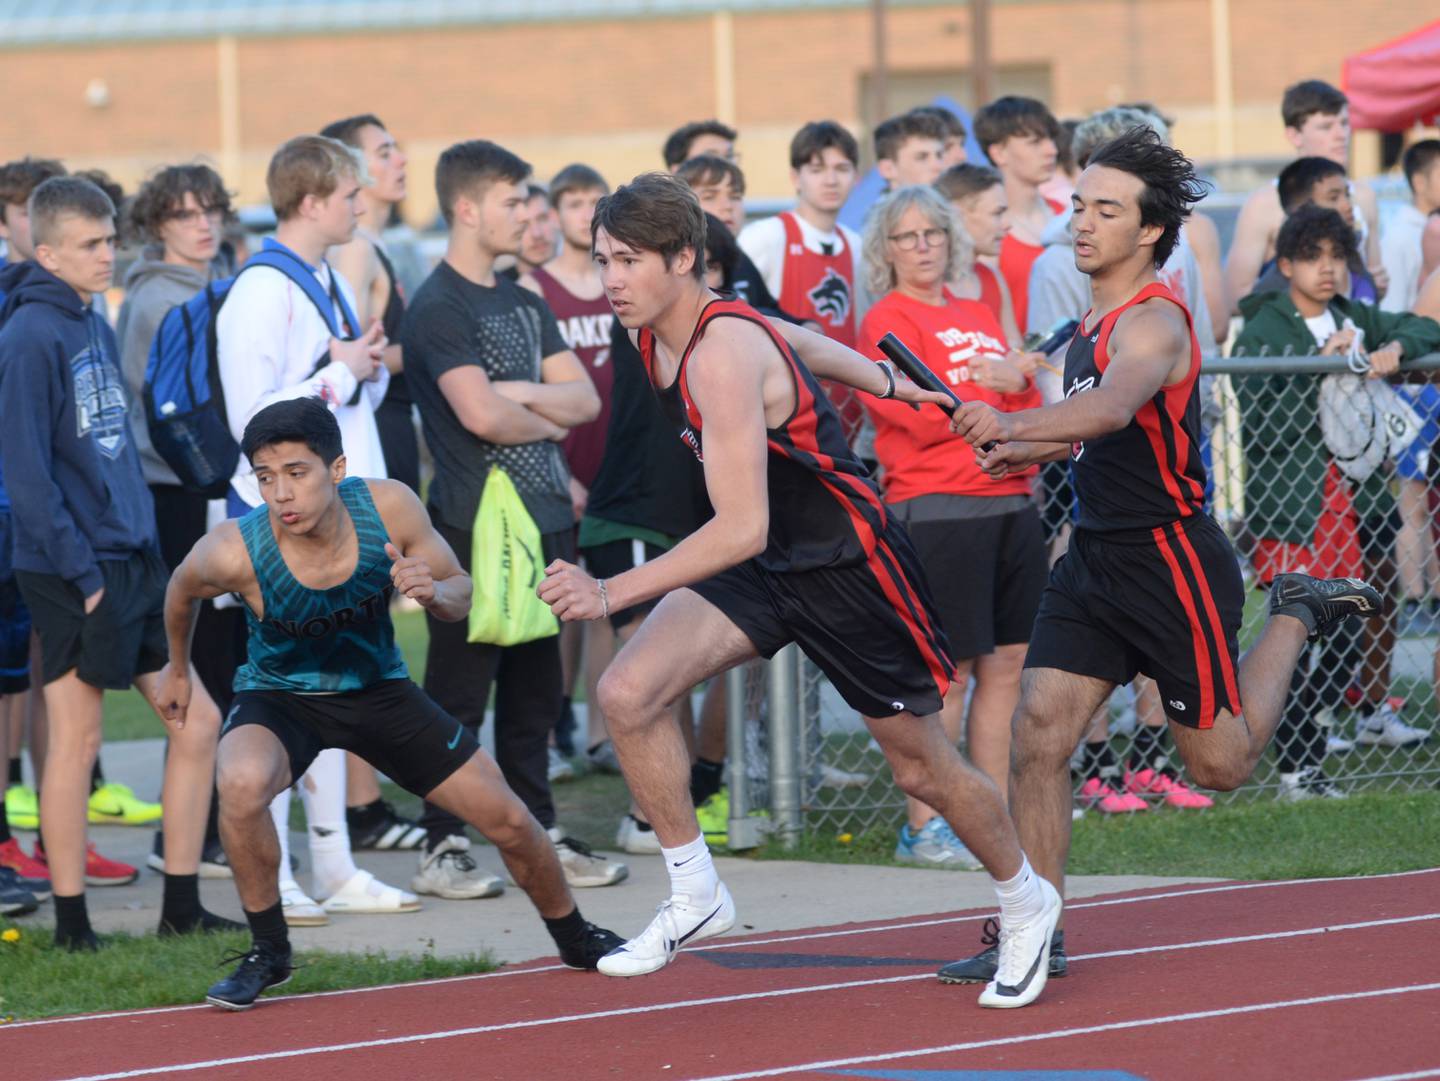 Forreston-Polo's DeAngelo Fernandez hands the baton to Noah Dewey during the 800 meter relay at the Hawk Classic in Oregon on Friday, April 28.